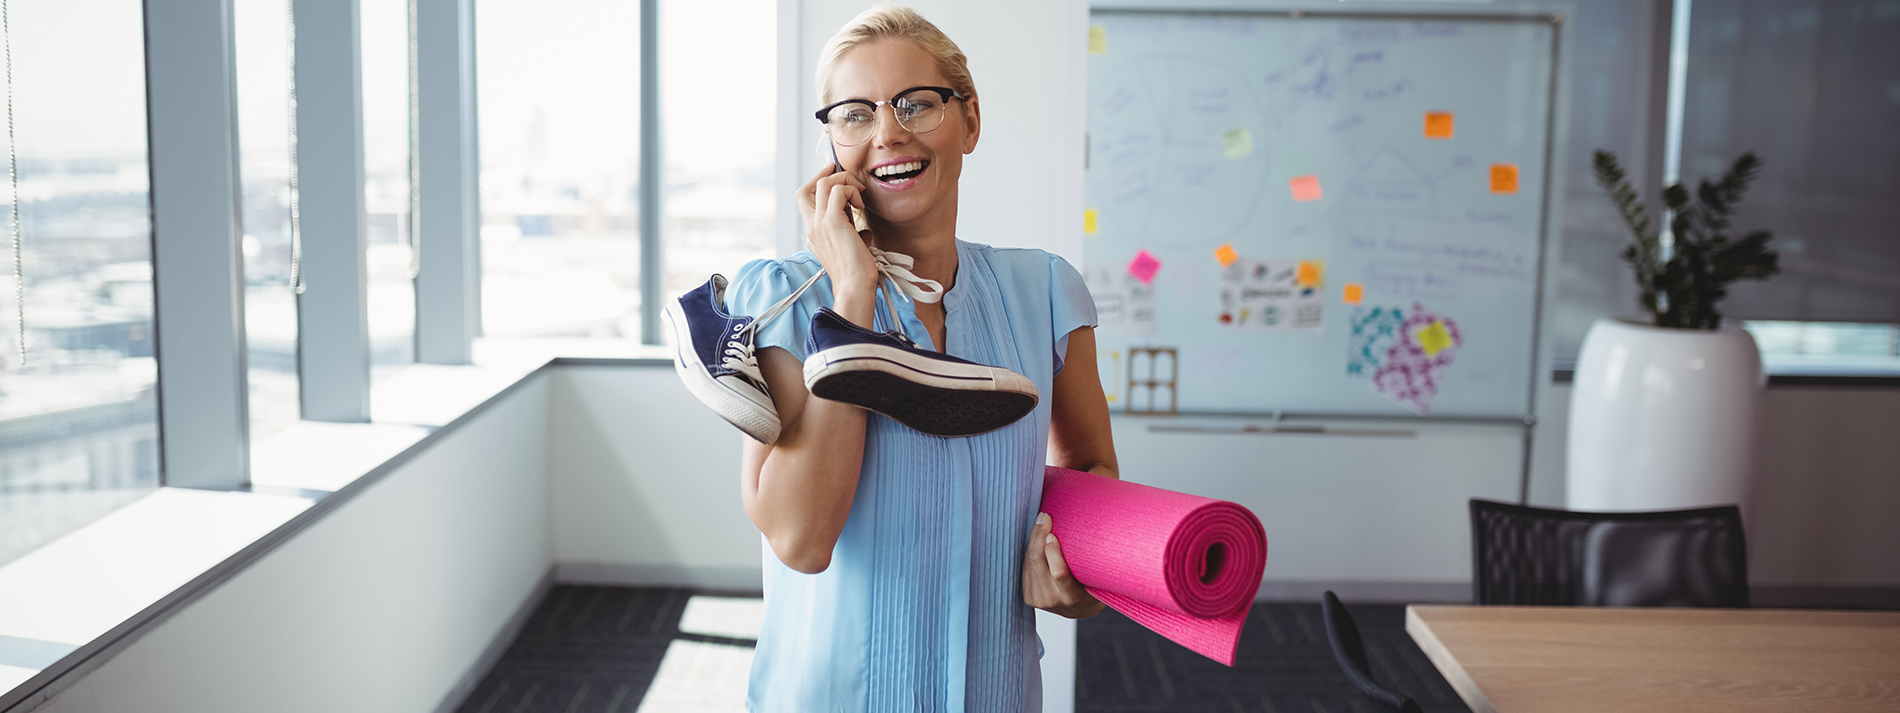 Woman smiling on the phone while holding yoga mat and sneakers